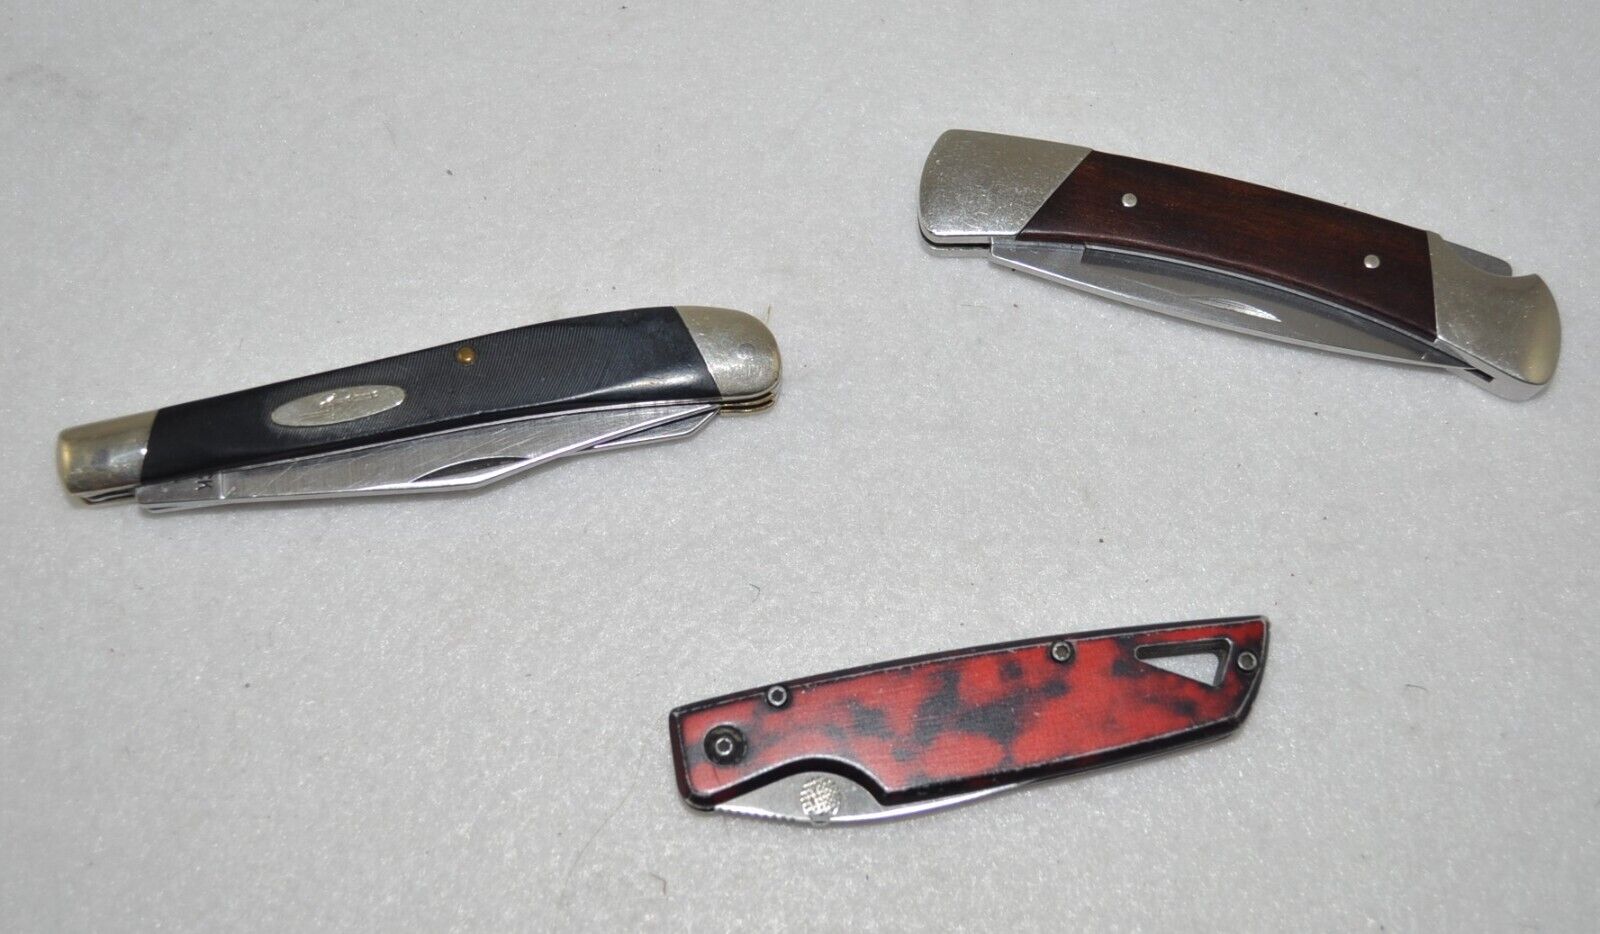 Lot of 3 Buck Pocket Knives #311, #551 and #170